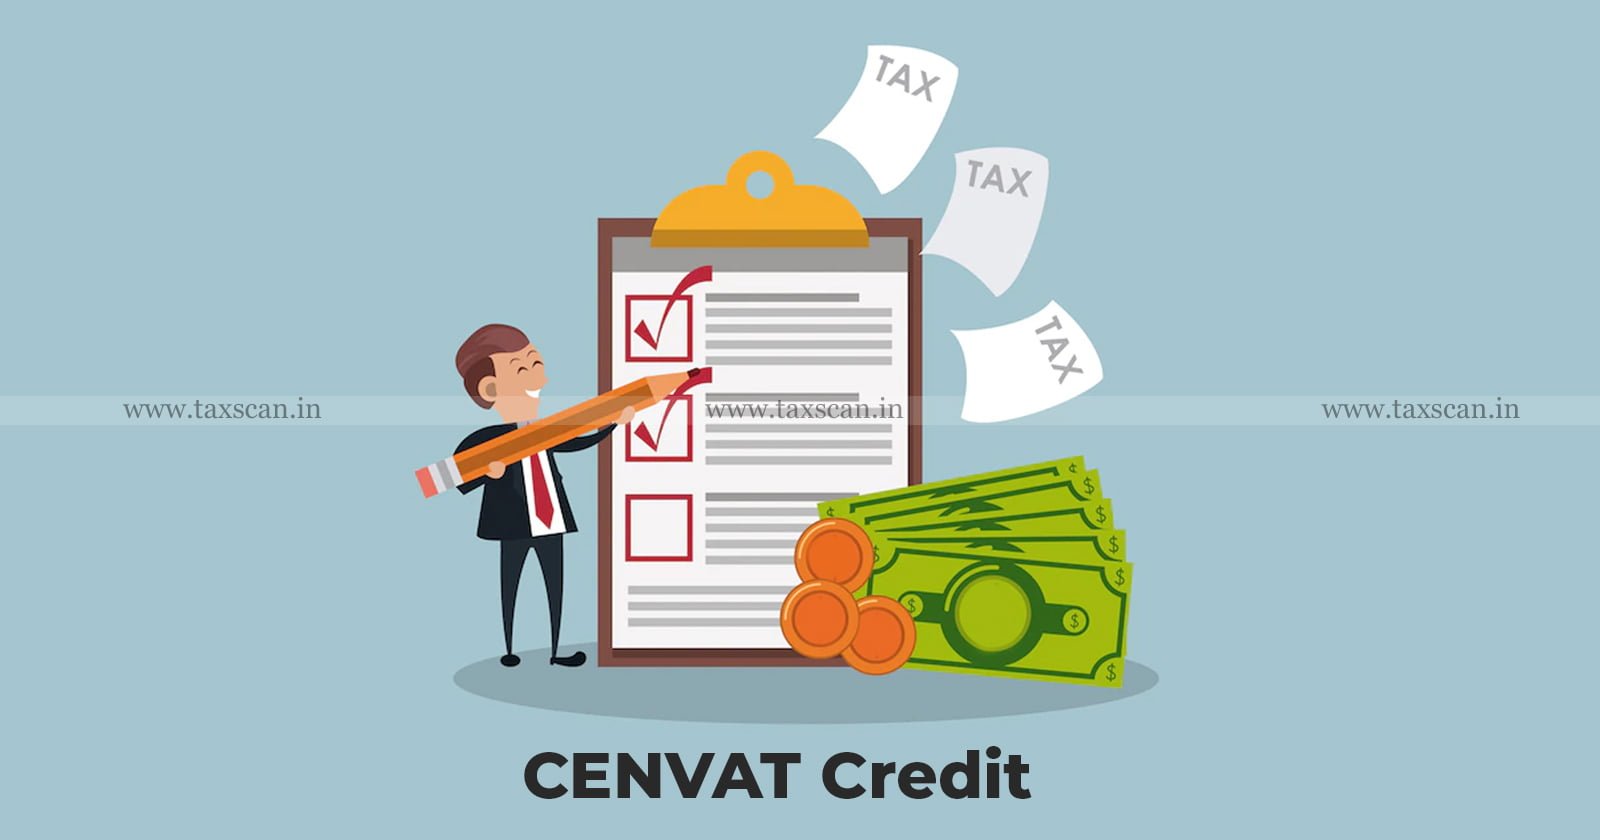 Cenvat Credit Allowable on Warranty Services - Included in Assessable Value of Final Product - CESTAT - TAXSCAN